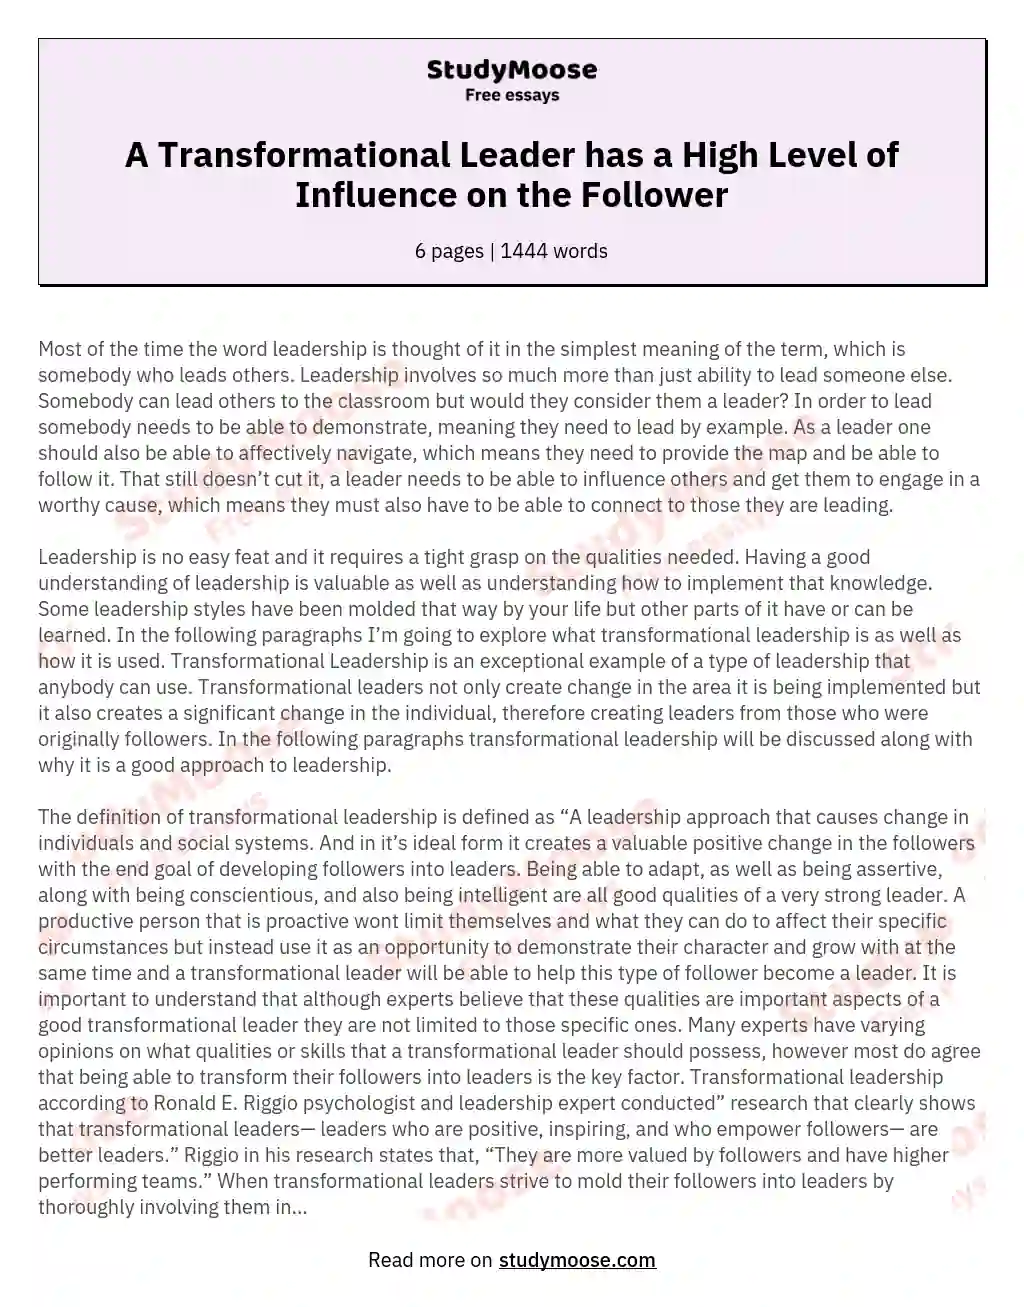 A Transformational Leader has a High Level of Influence on the Follower essay